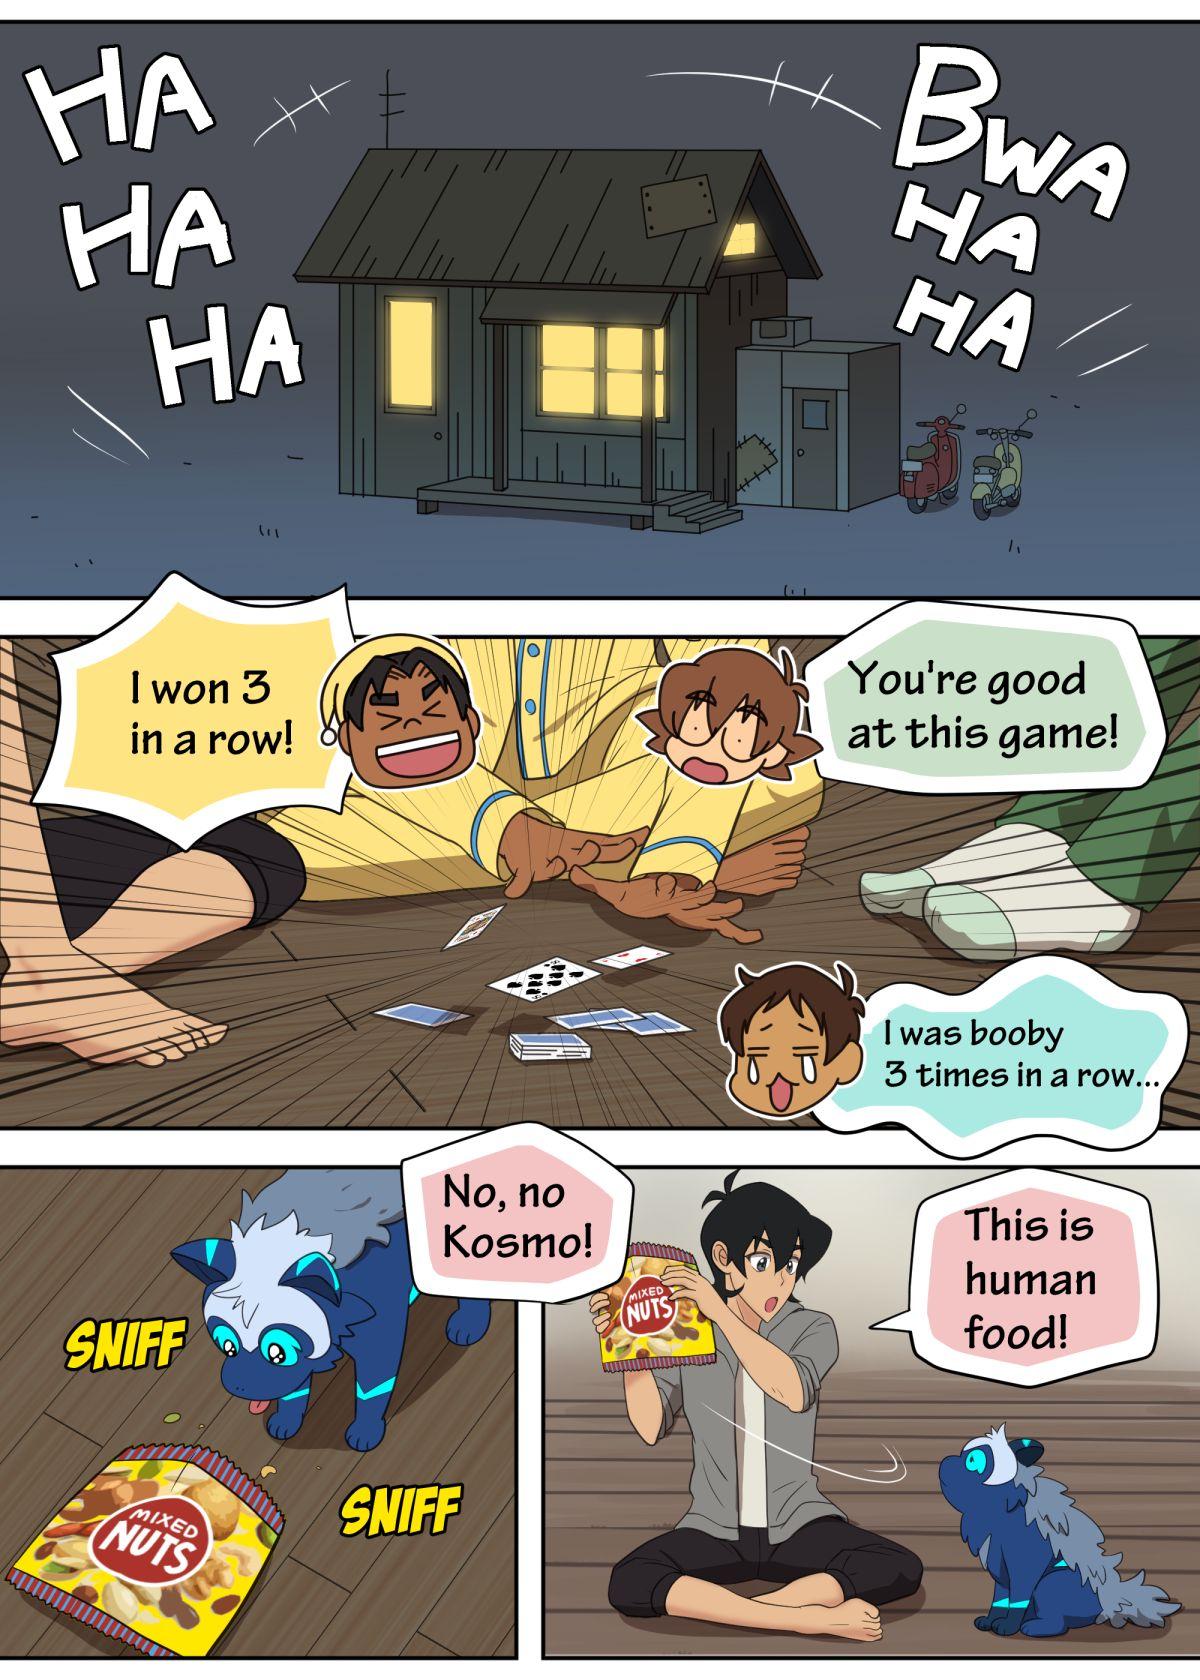 Masterbation The sleepover game! - Voltron Butthole - Page 12